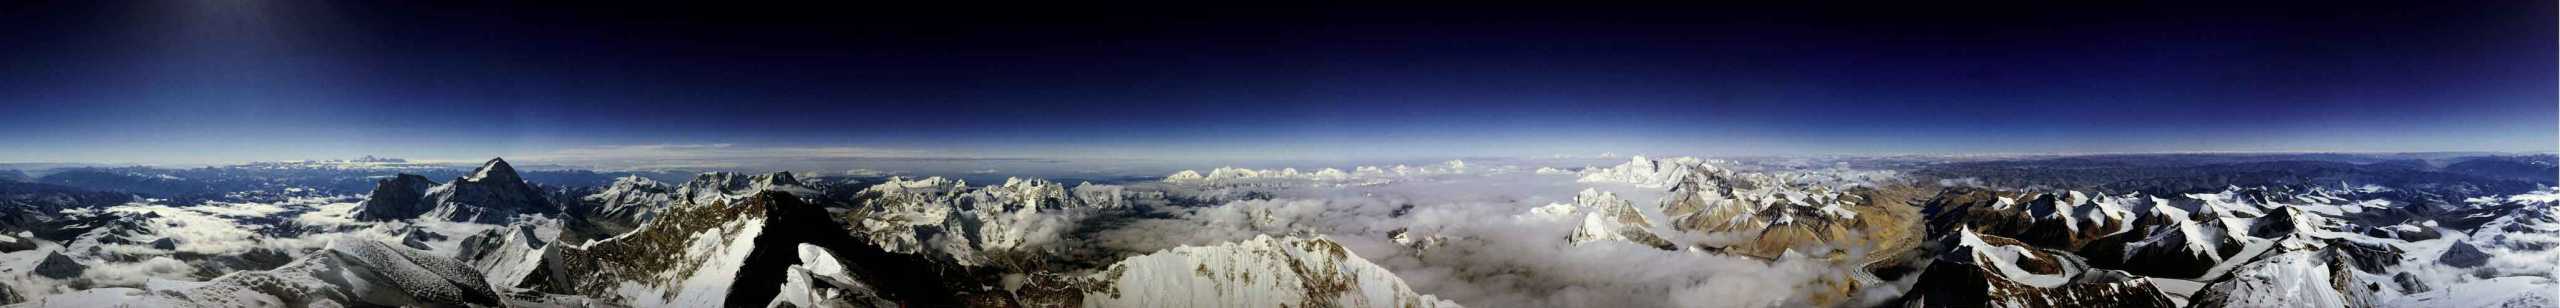 Mt. Everest pananormic view